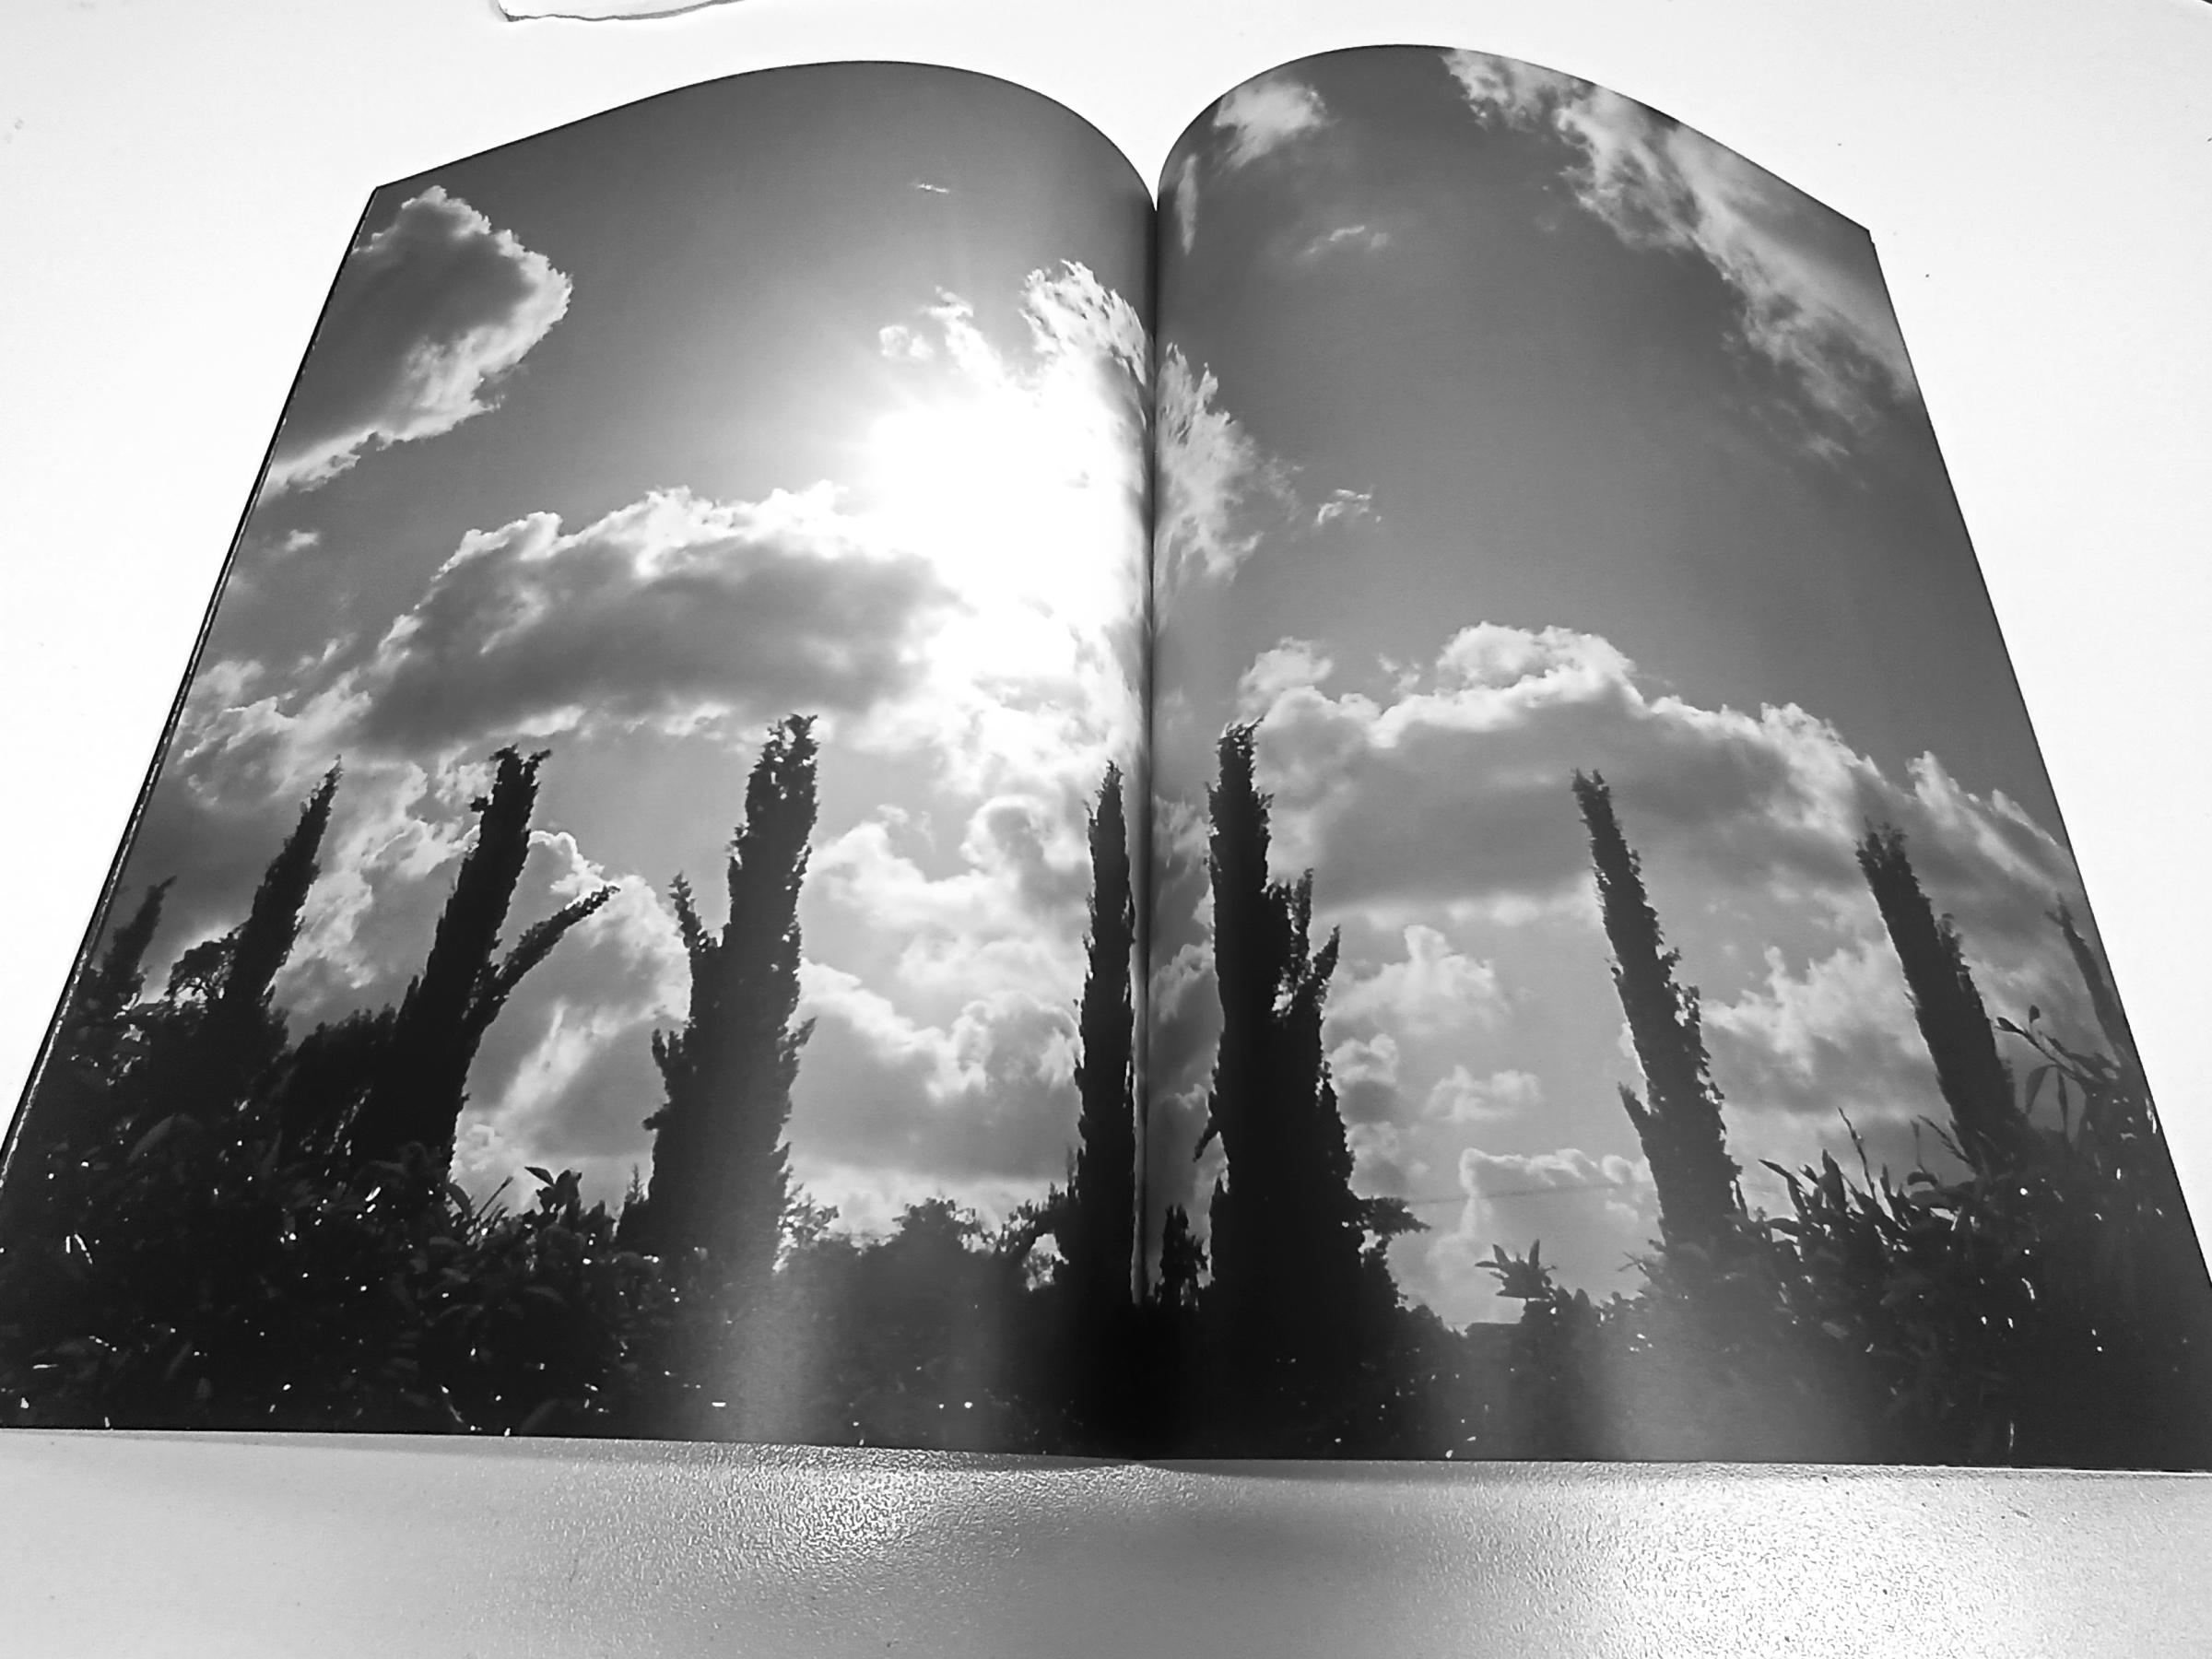 My third self-published photo book (this time a magazine) is available online in my Blurb site books portfolio.